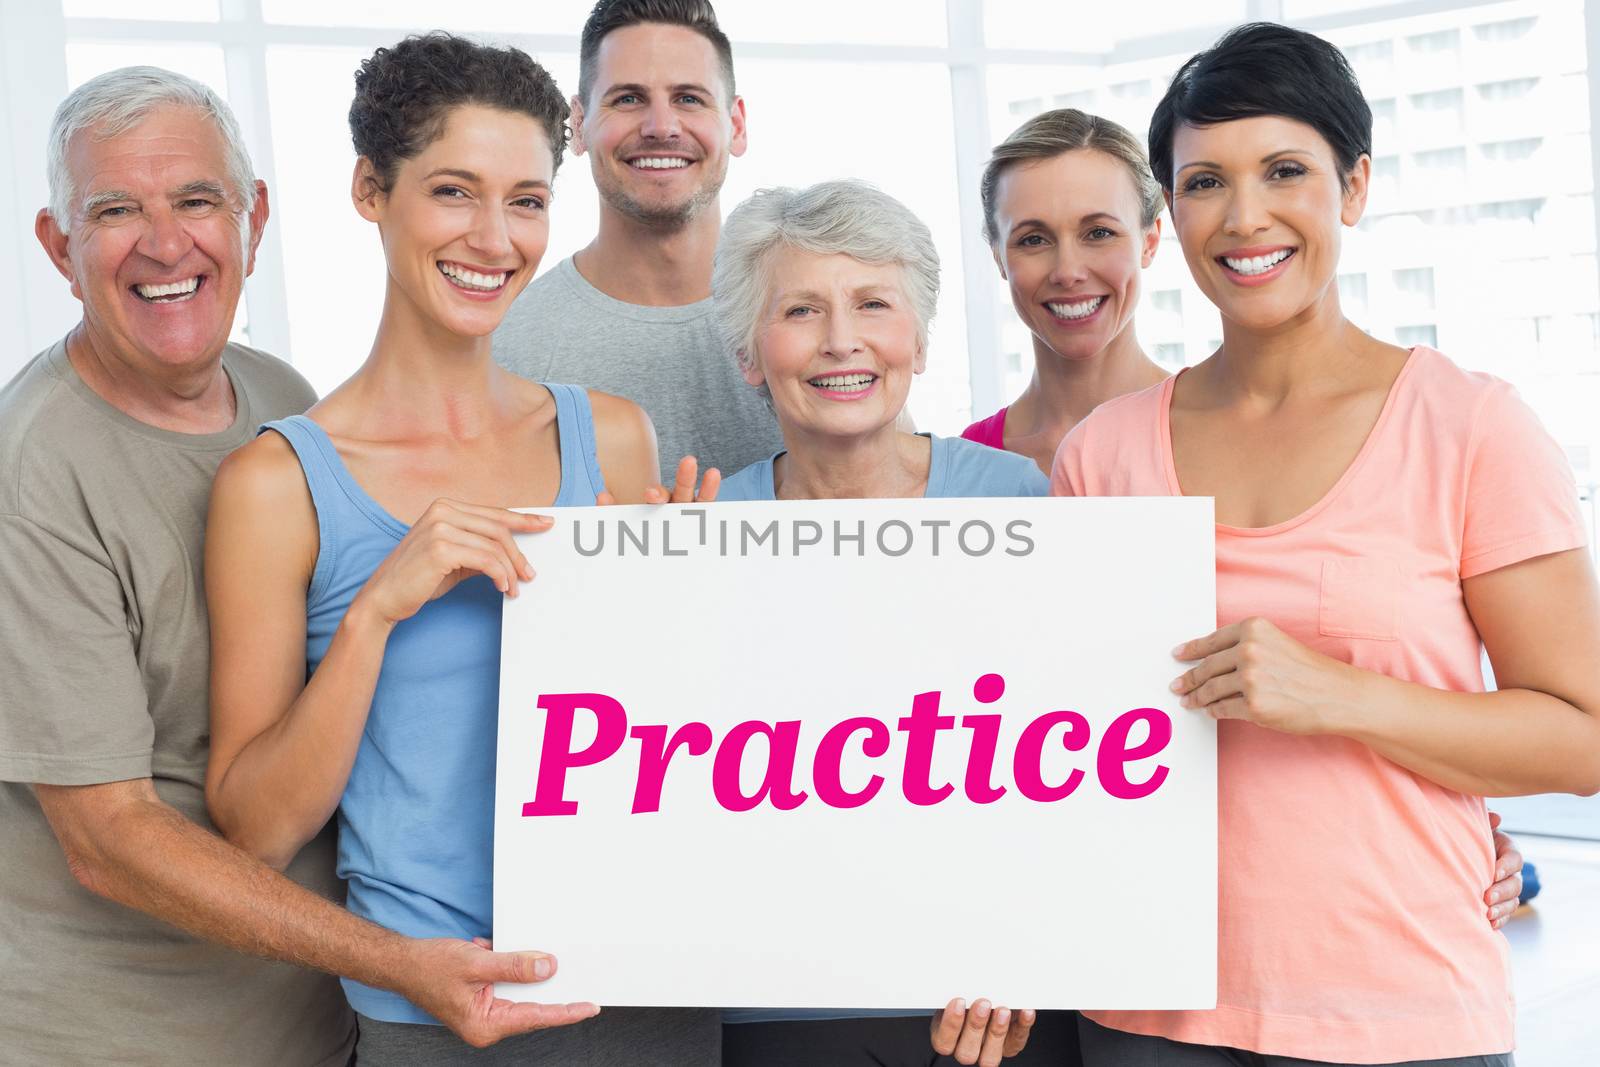 The word practice and fit people holding blank board in yoga class against room with wooden floor